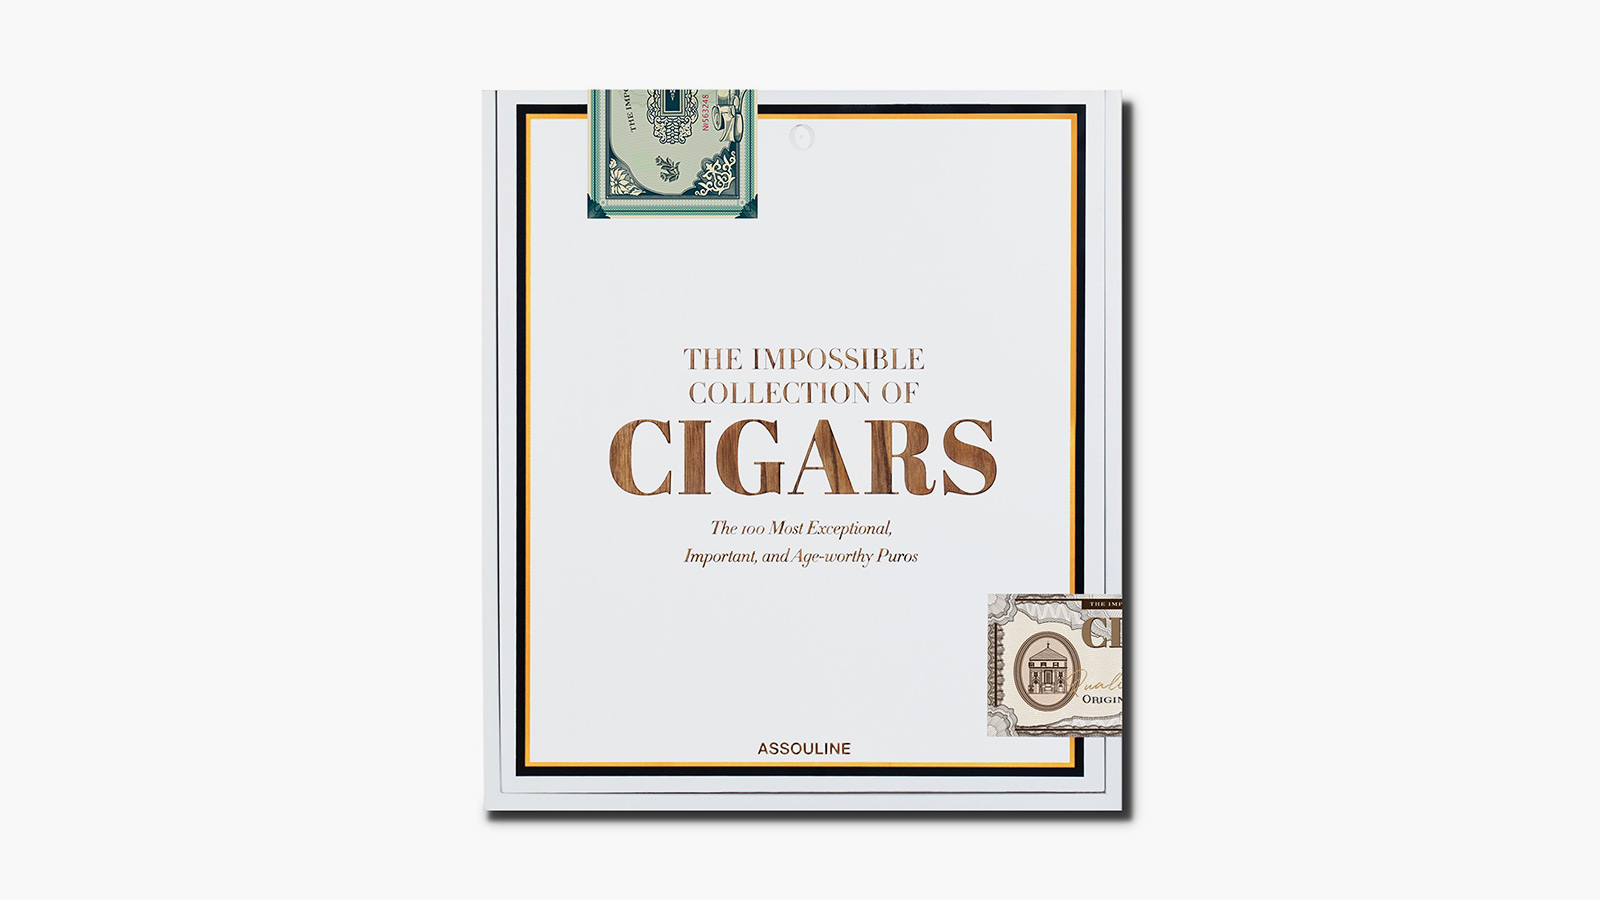 The Impossible Collection of Cigars by Aaron Sigmond 